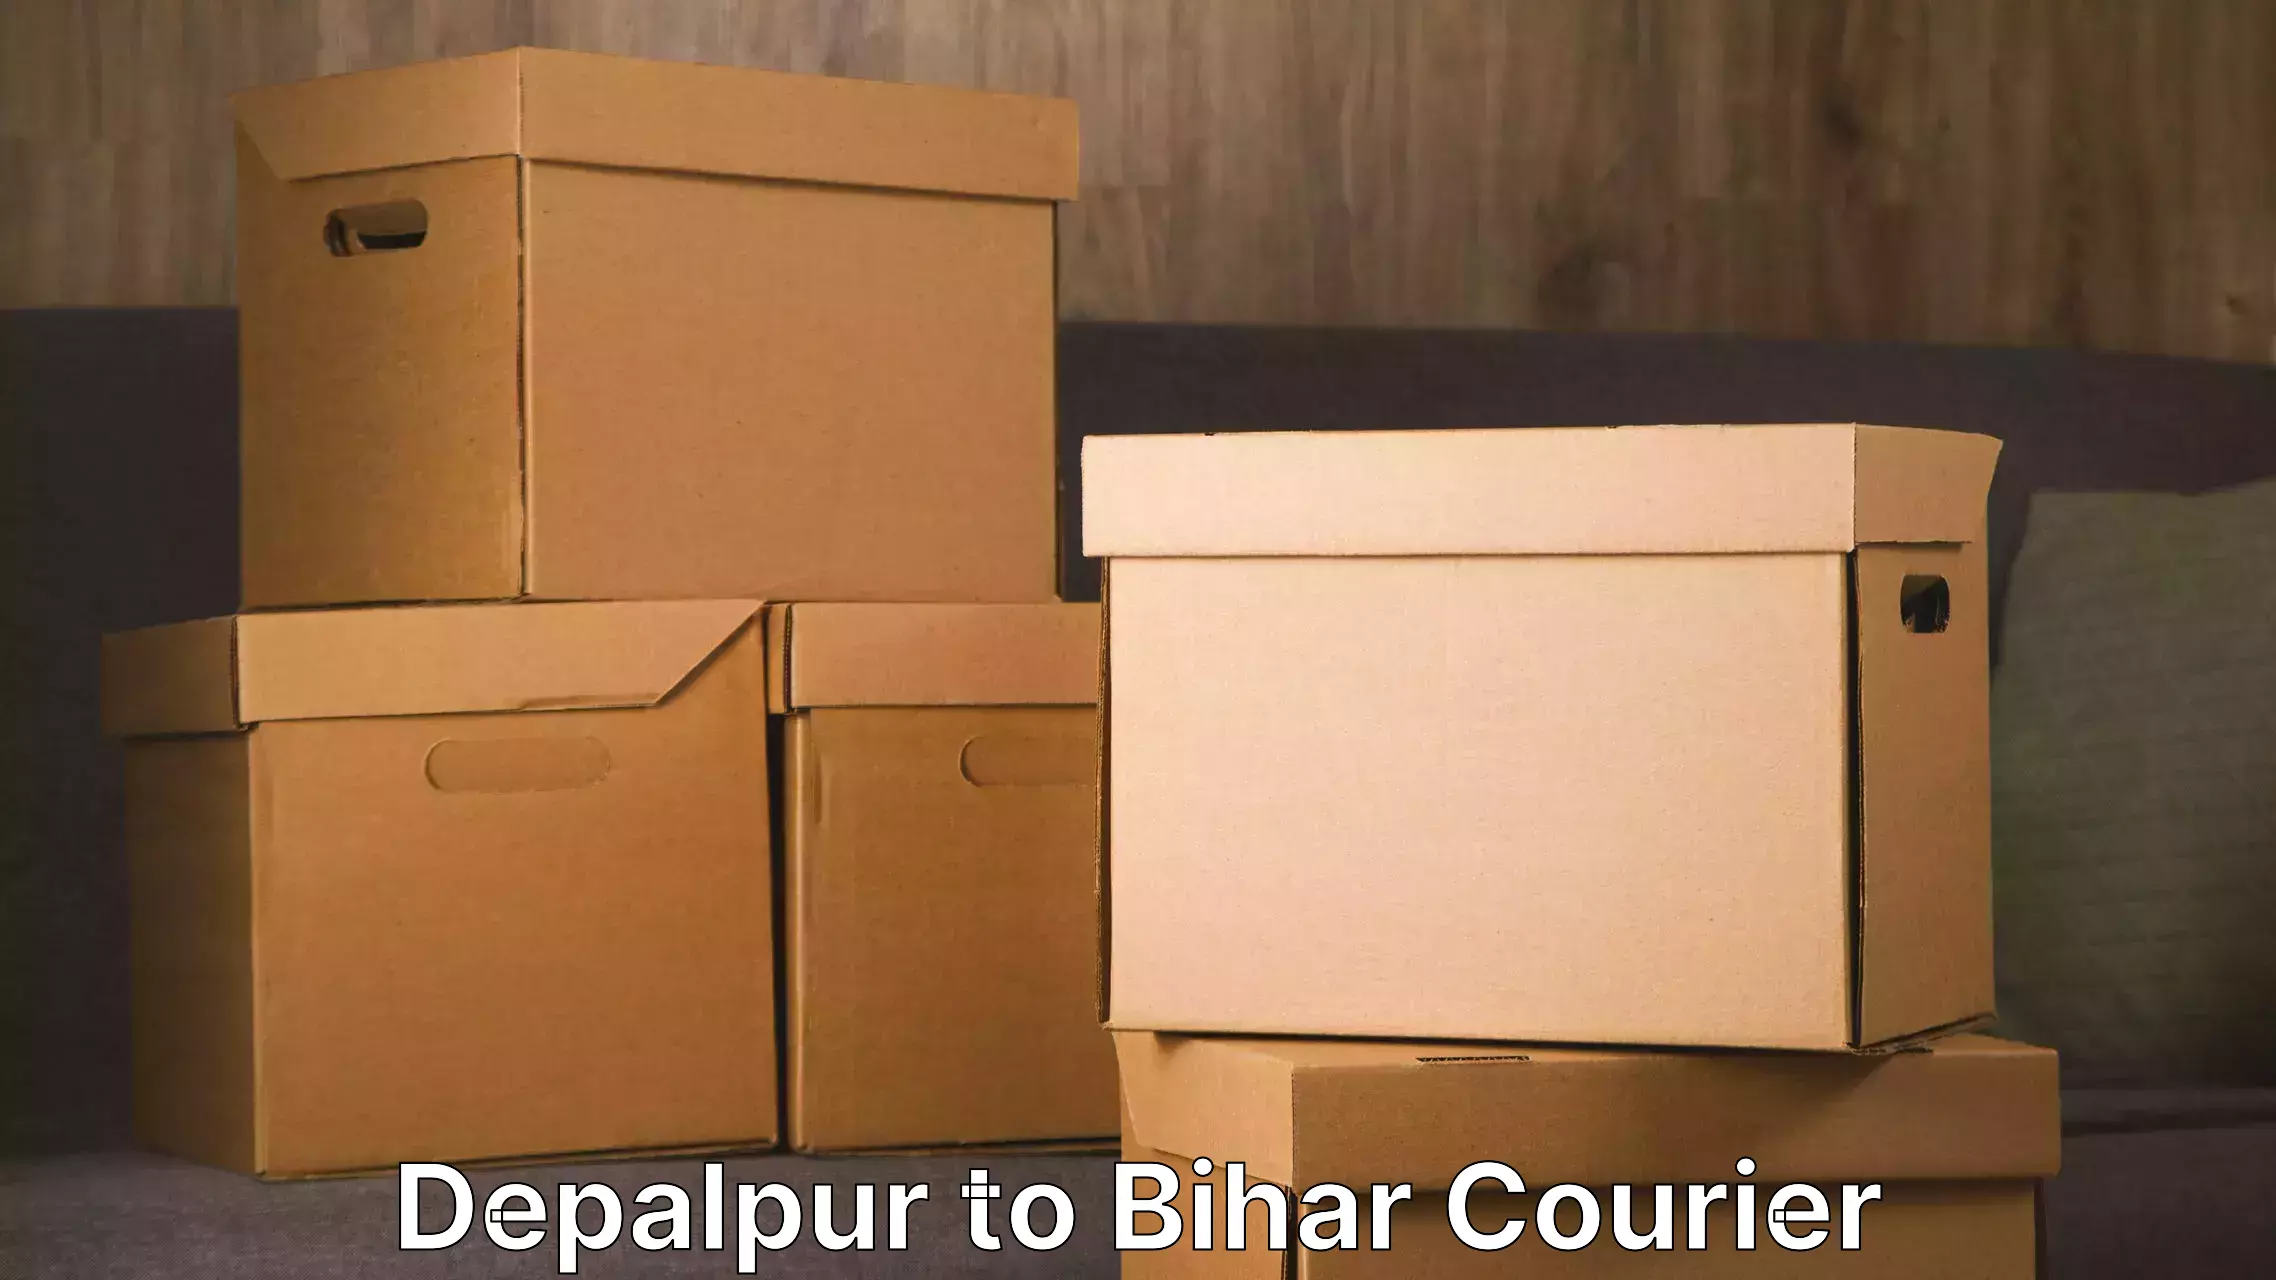 Furniture delivery service Depalpur to Sharfuddinpur